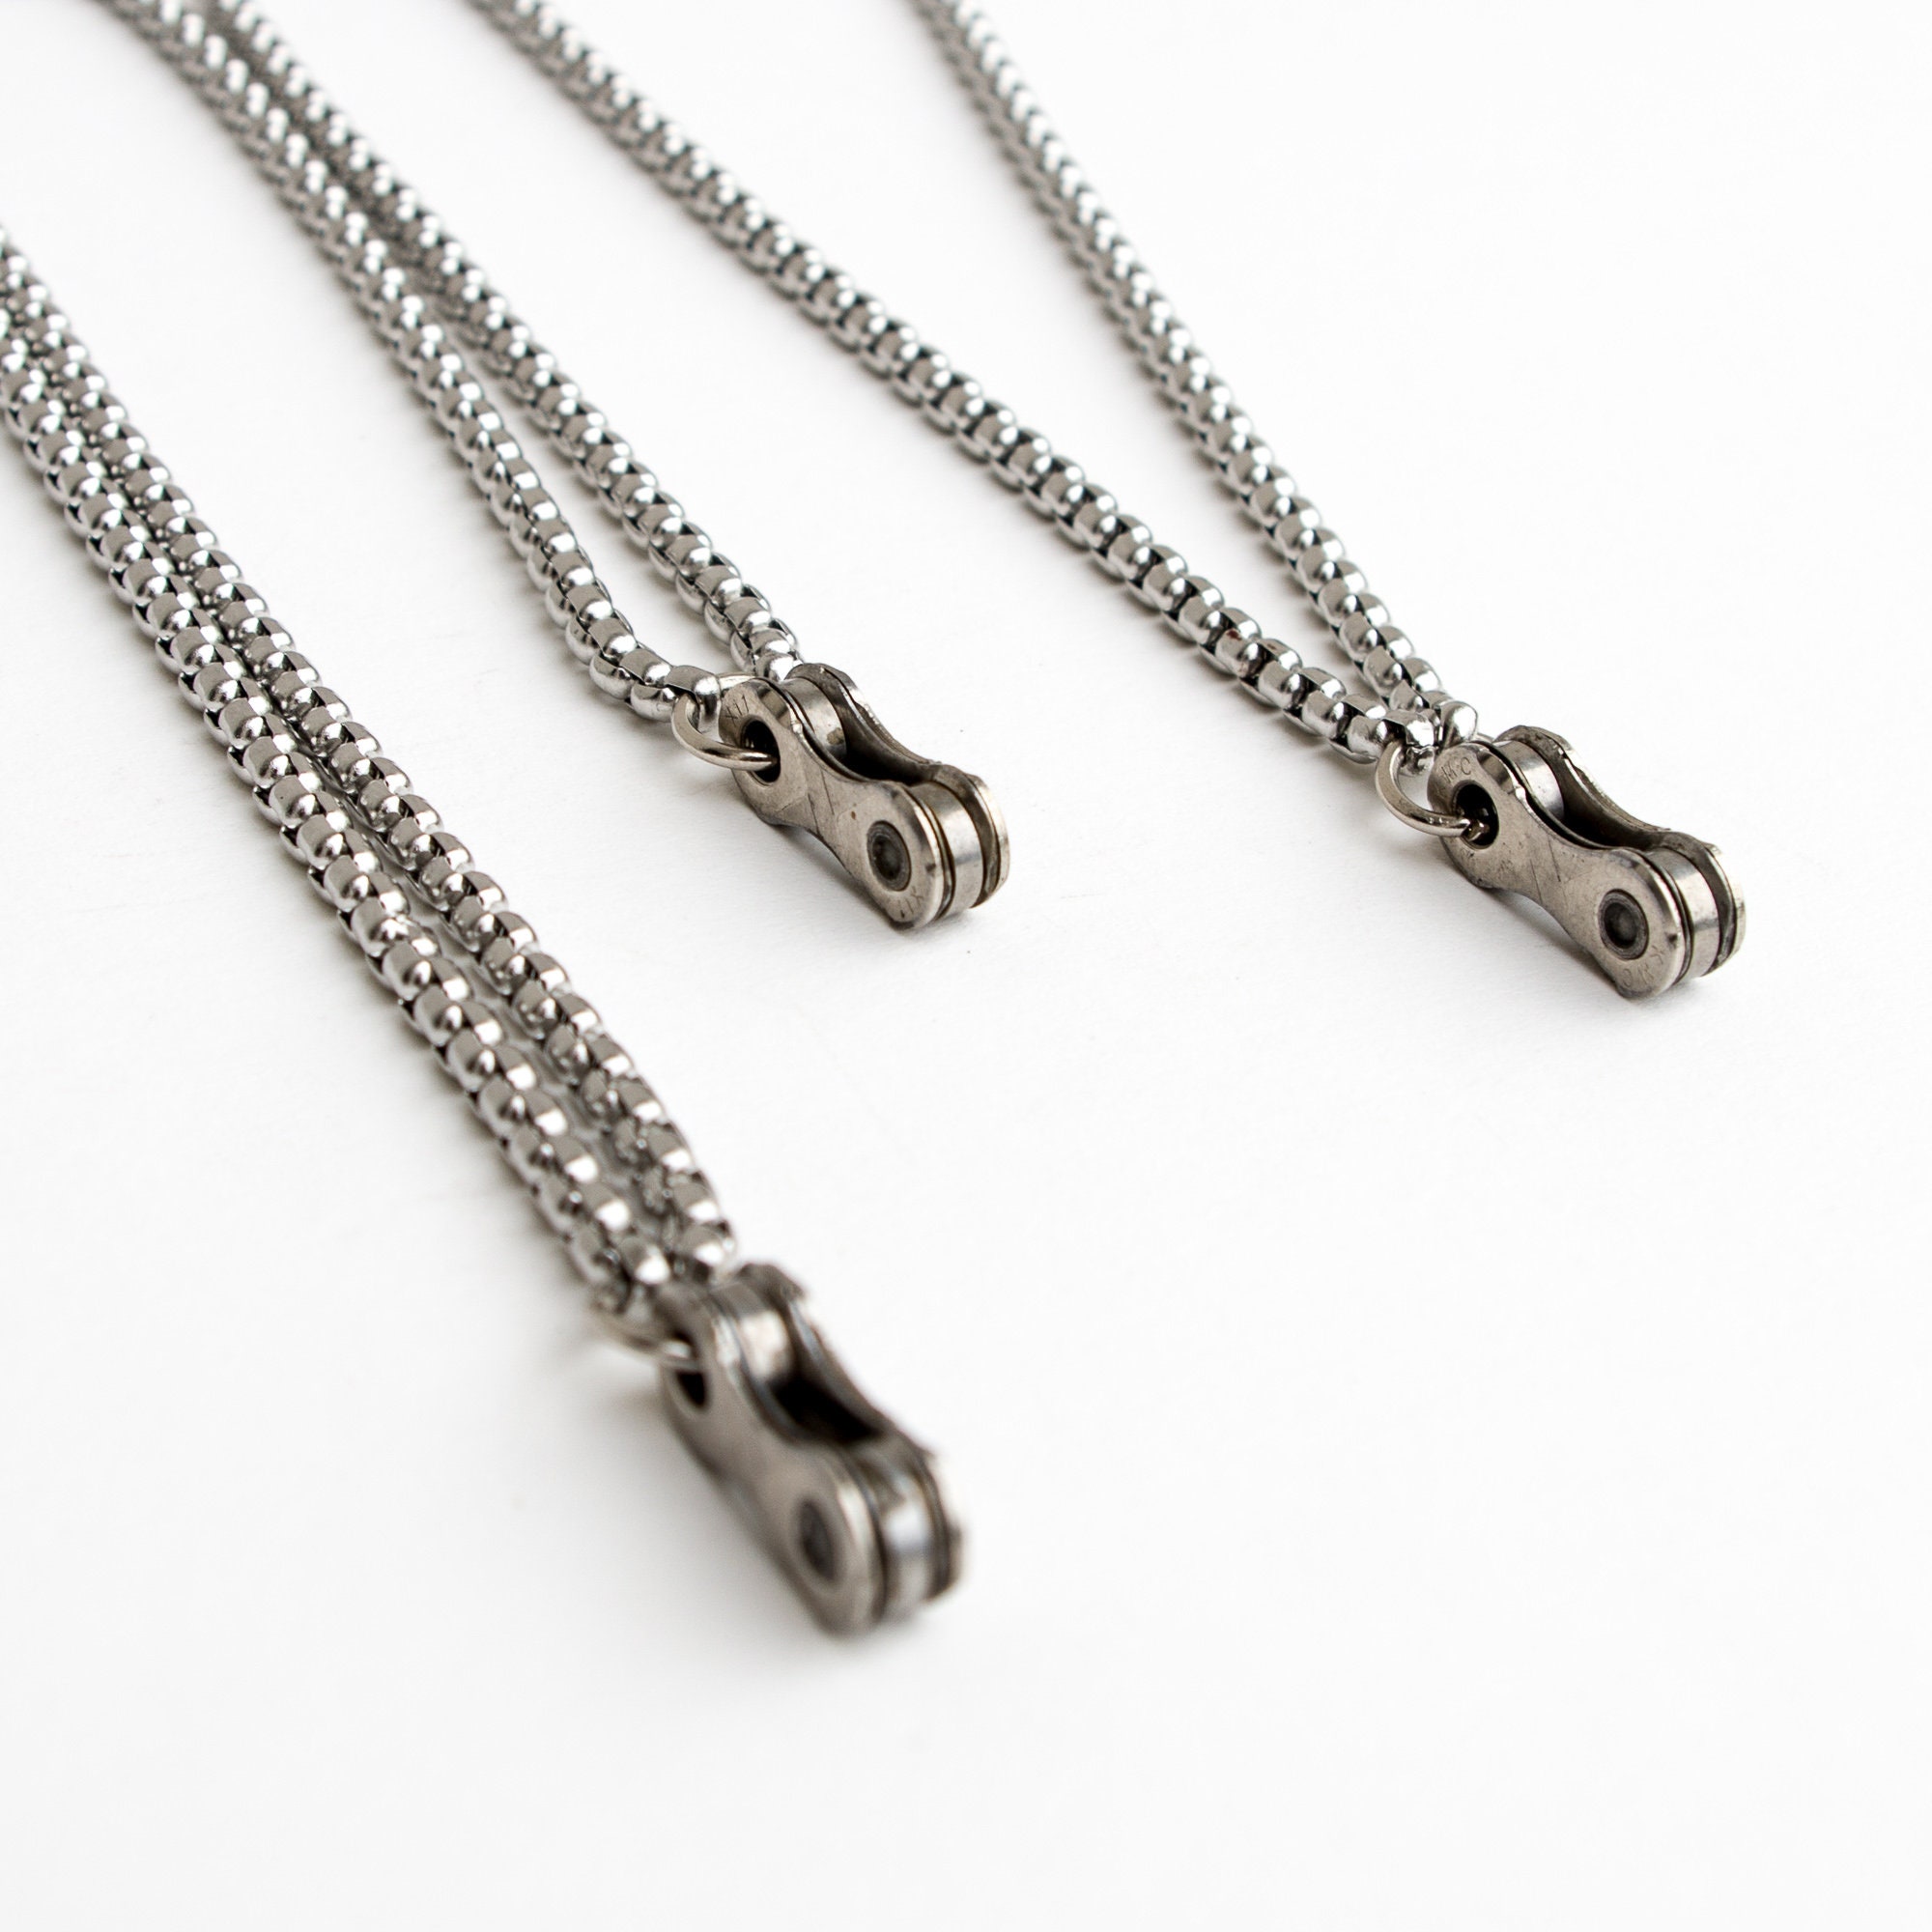 Bicycle Chain Pendant Necklace Long Chain Link Neclace Bike - Etsy